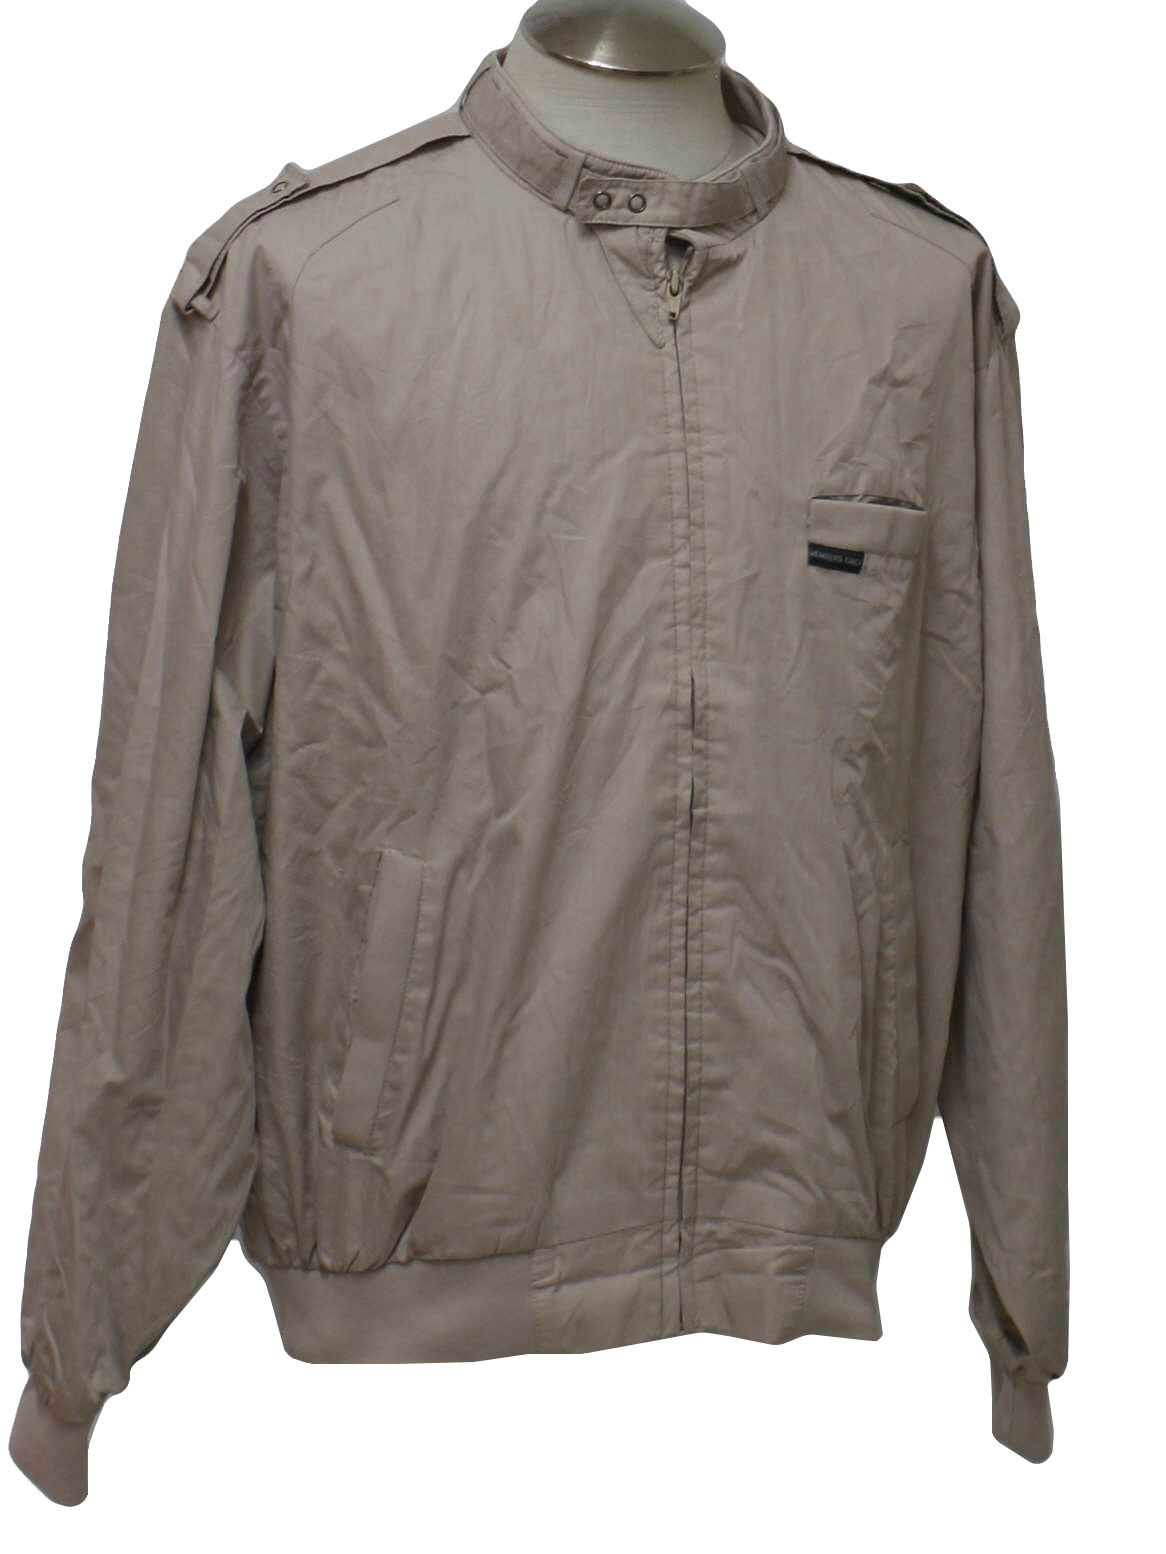 Eighties Members Only Jacket: 80s -Members Only- Mens beige cotton and ...